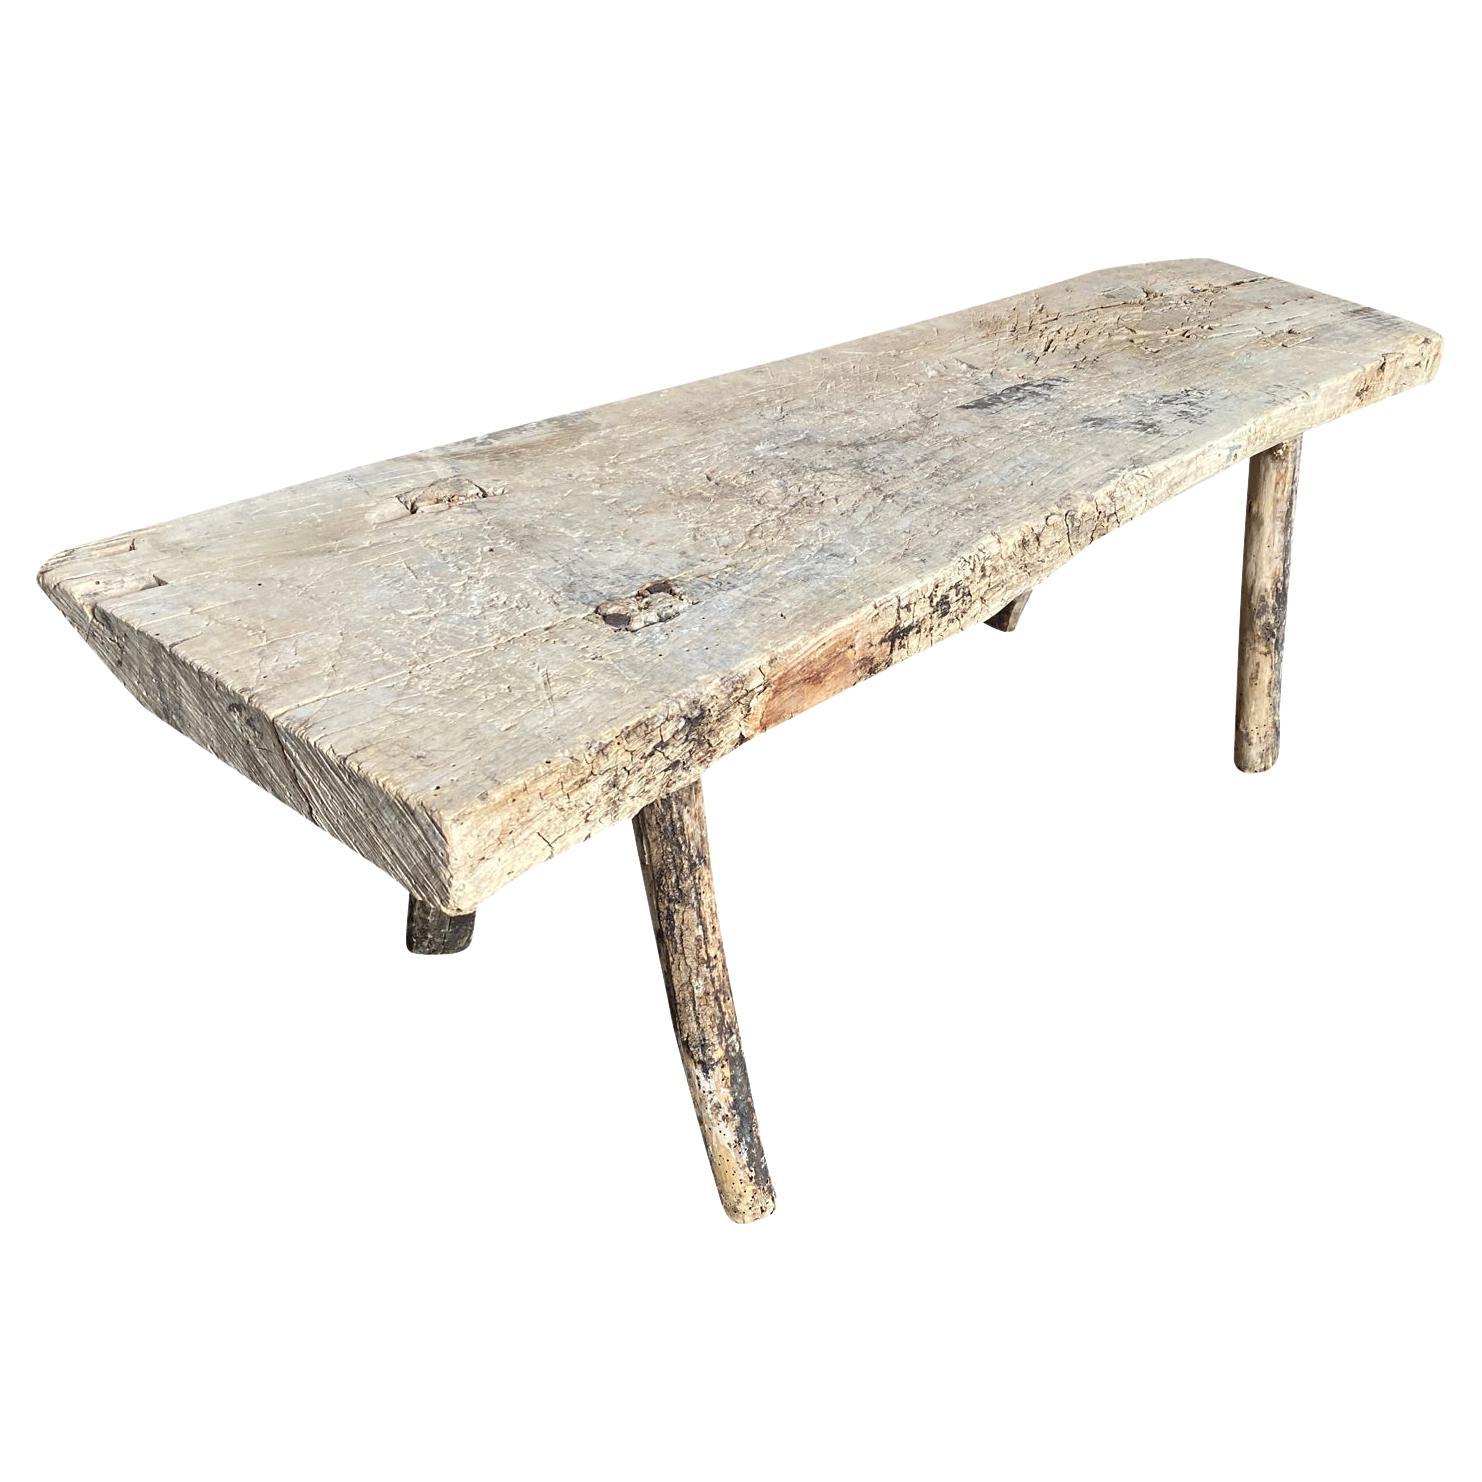 A primitive 18th century Bench - Coffee Table from the Catalan region of Spain.  Soundly constructed from naturally washed chestnut with a solid board top and slightly splayed legs.  Super patina and graining.